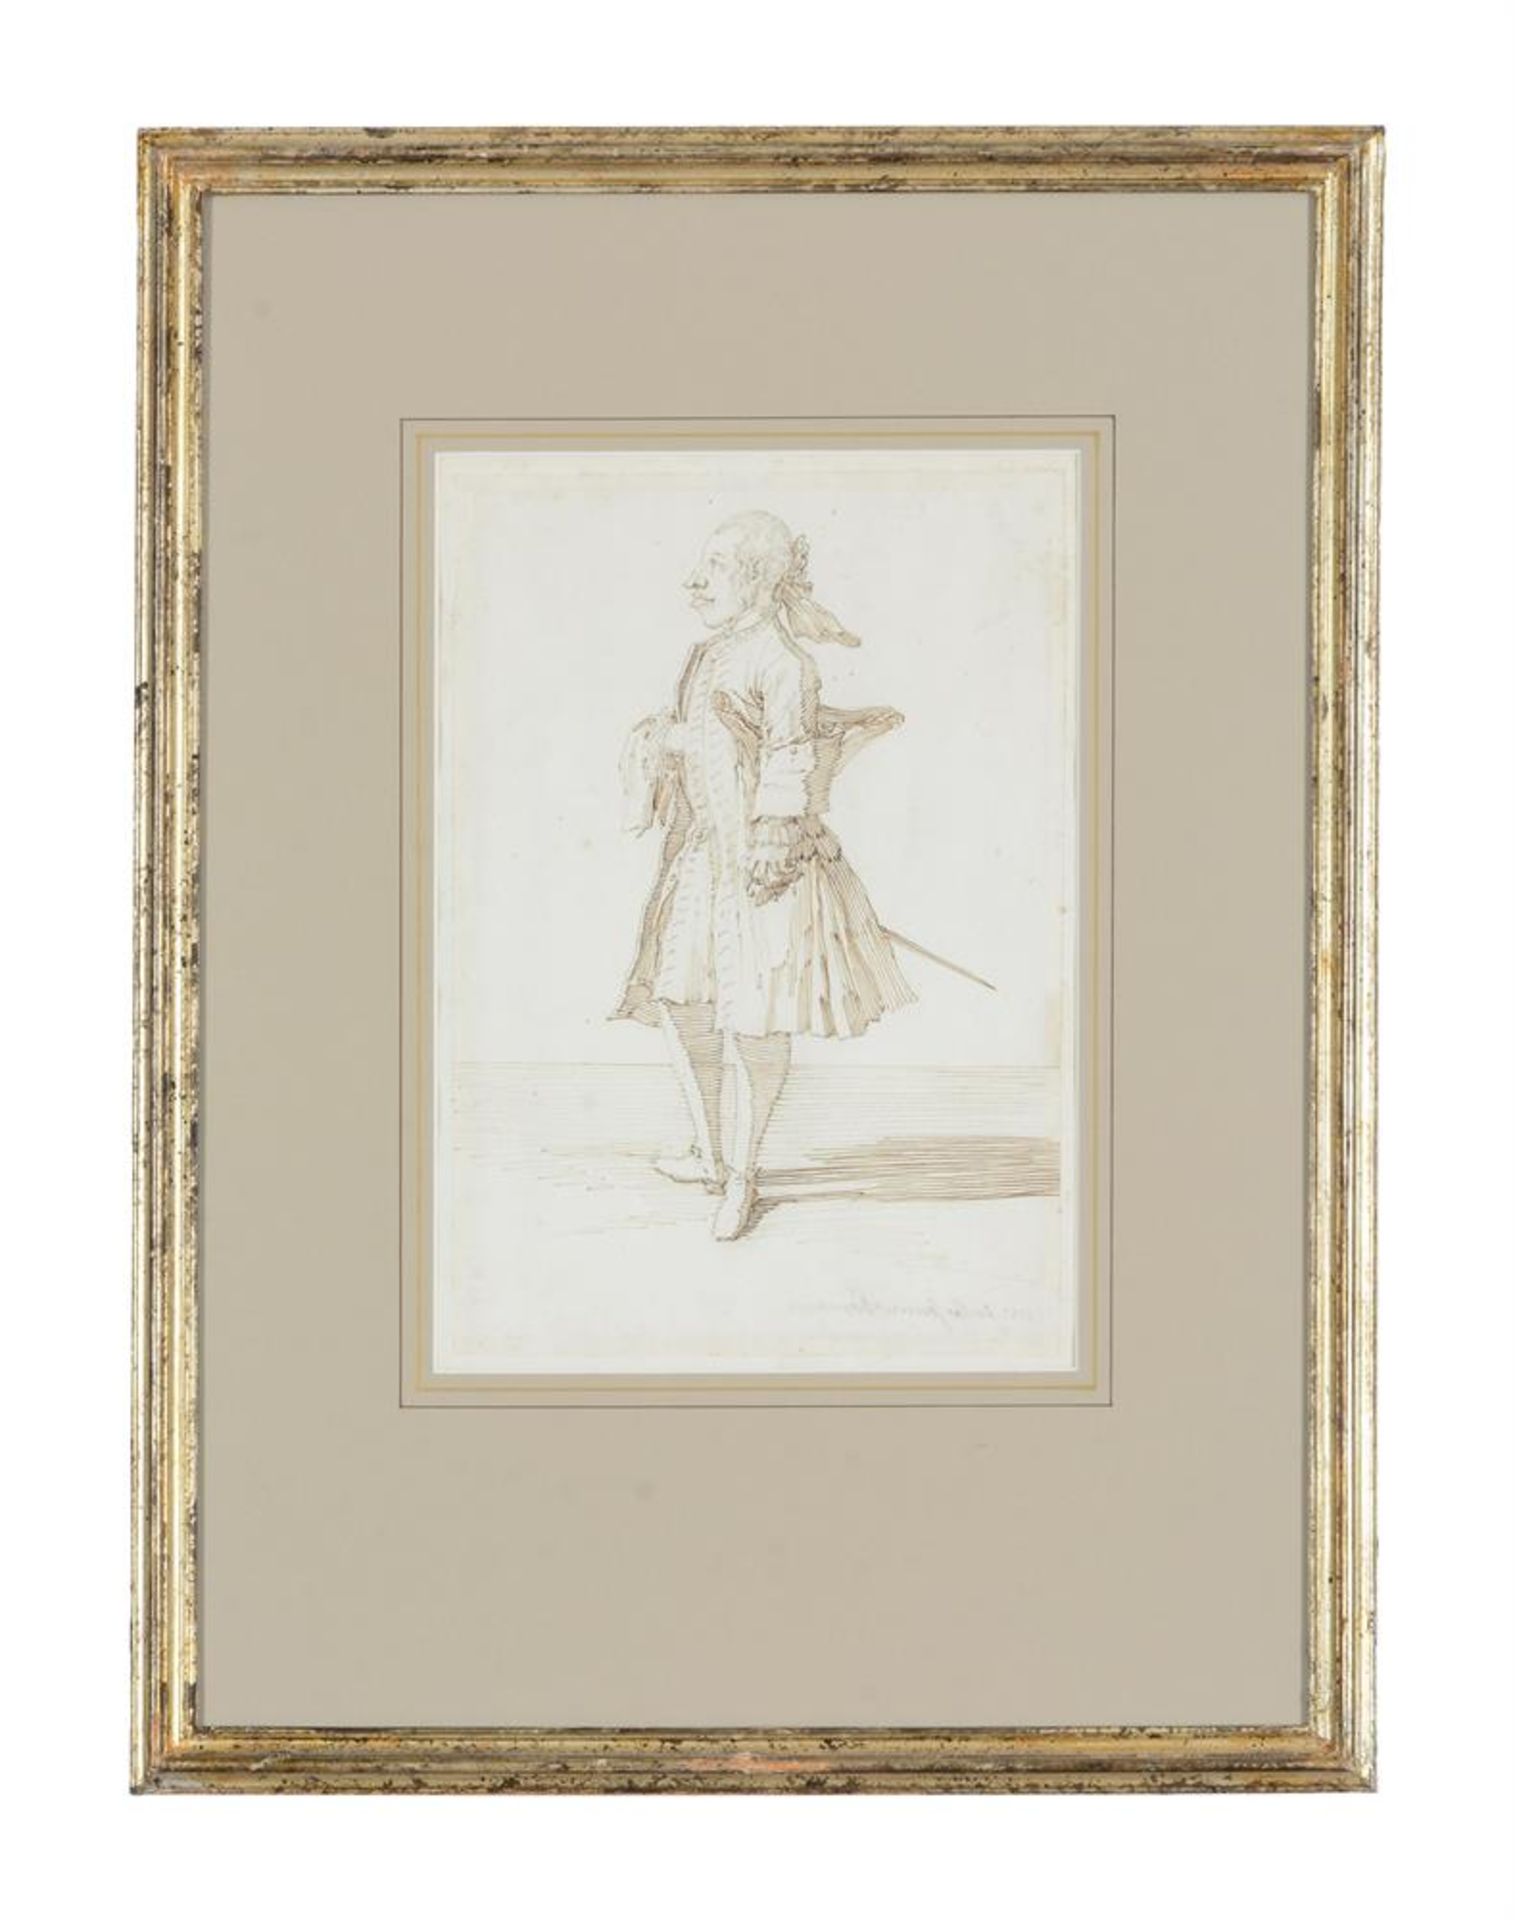 PIER LEONE GHEZZI (ITALIAN 1674-1755), SIXTEEN CARICATURES OF ARISTOCRATS, CLERICS AND TRAVELLERS - Image 35 of 48